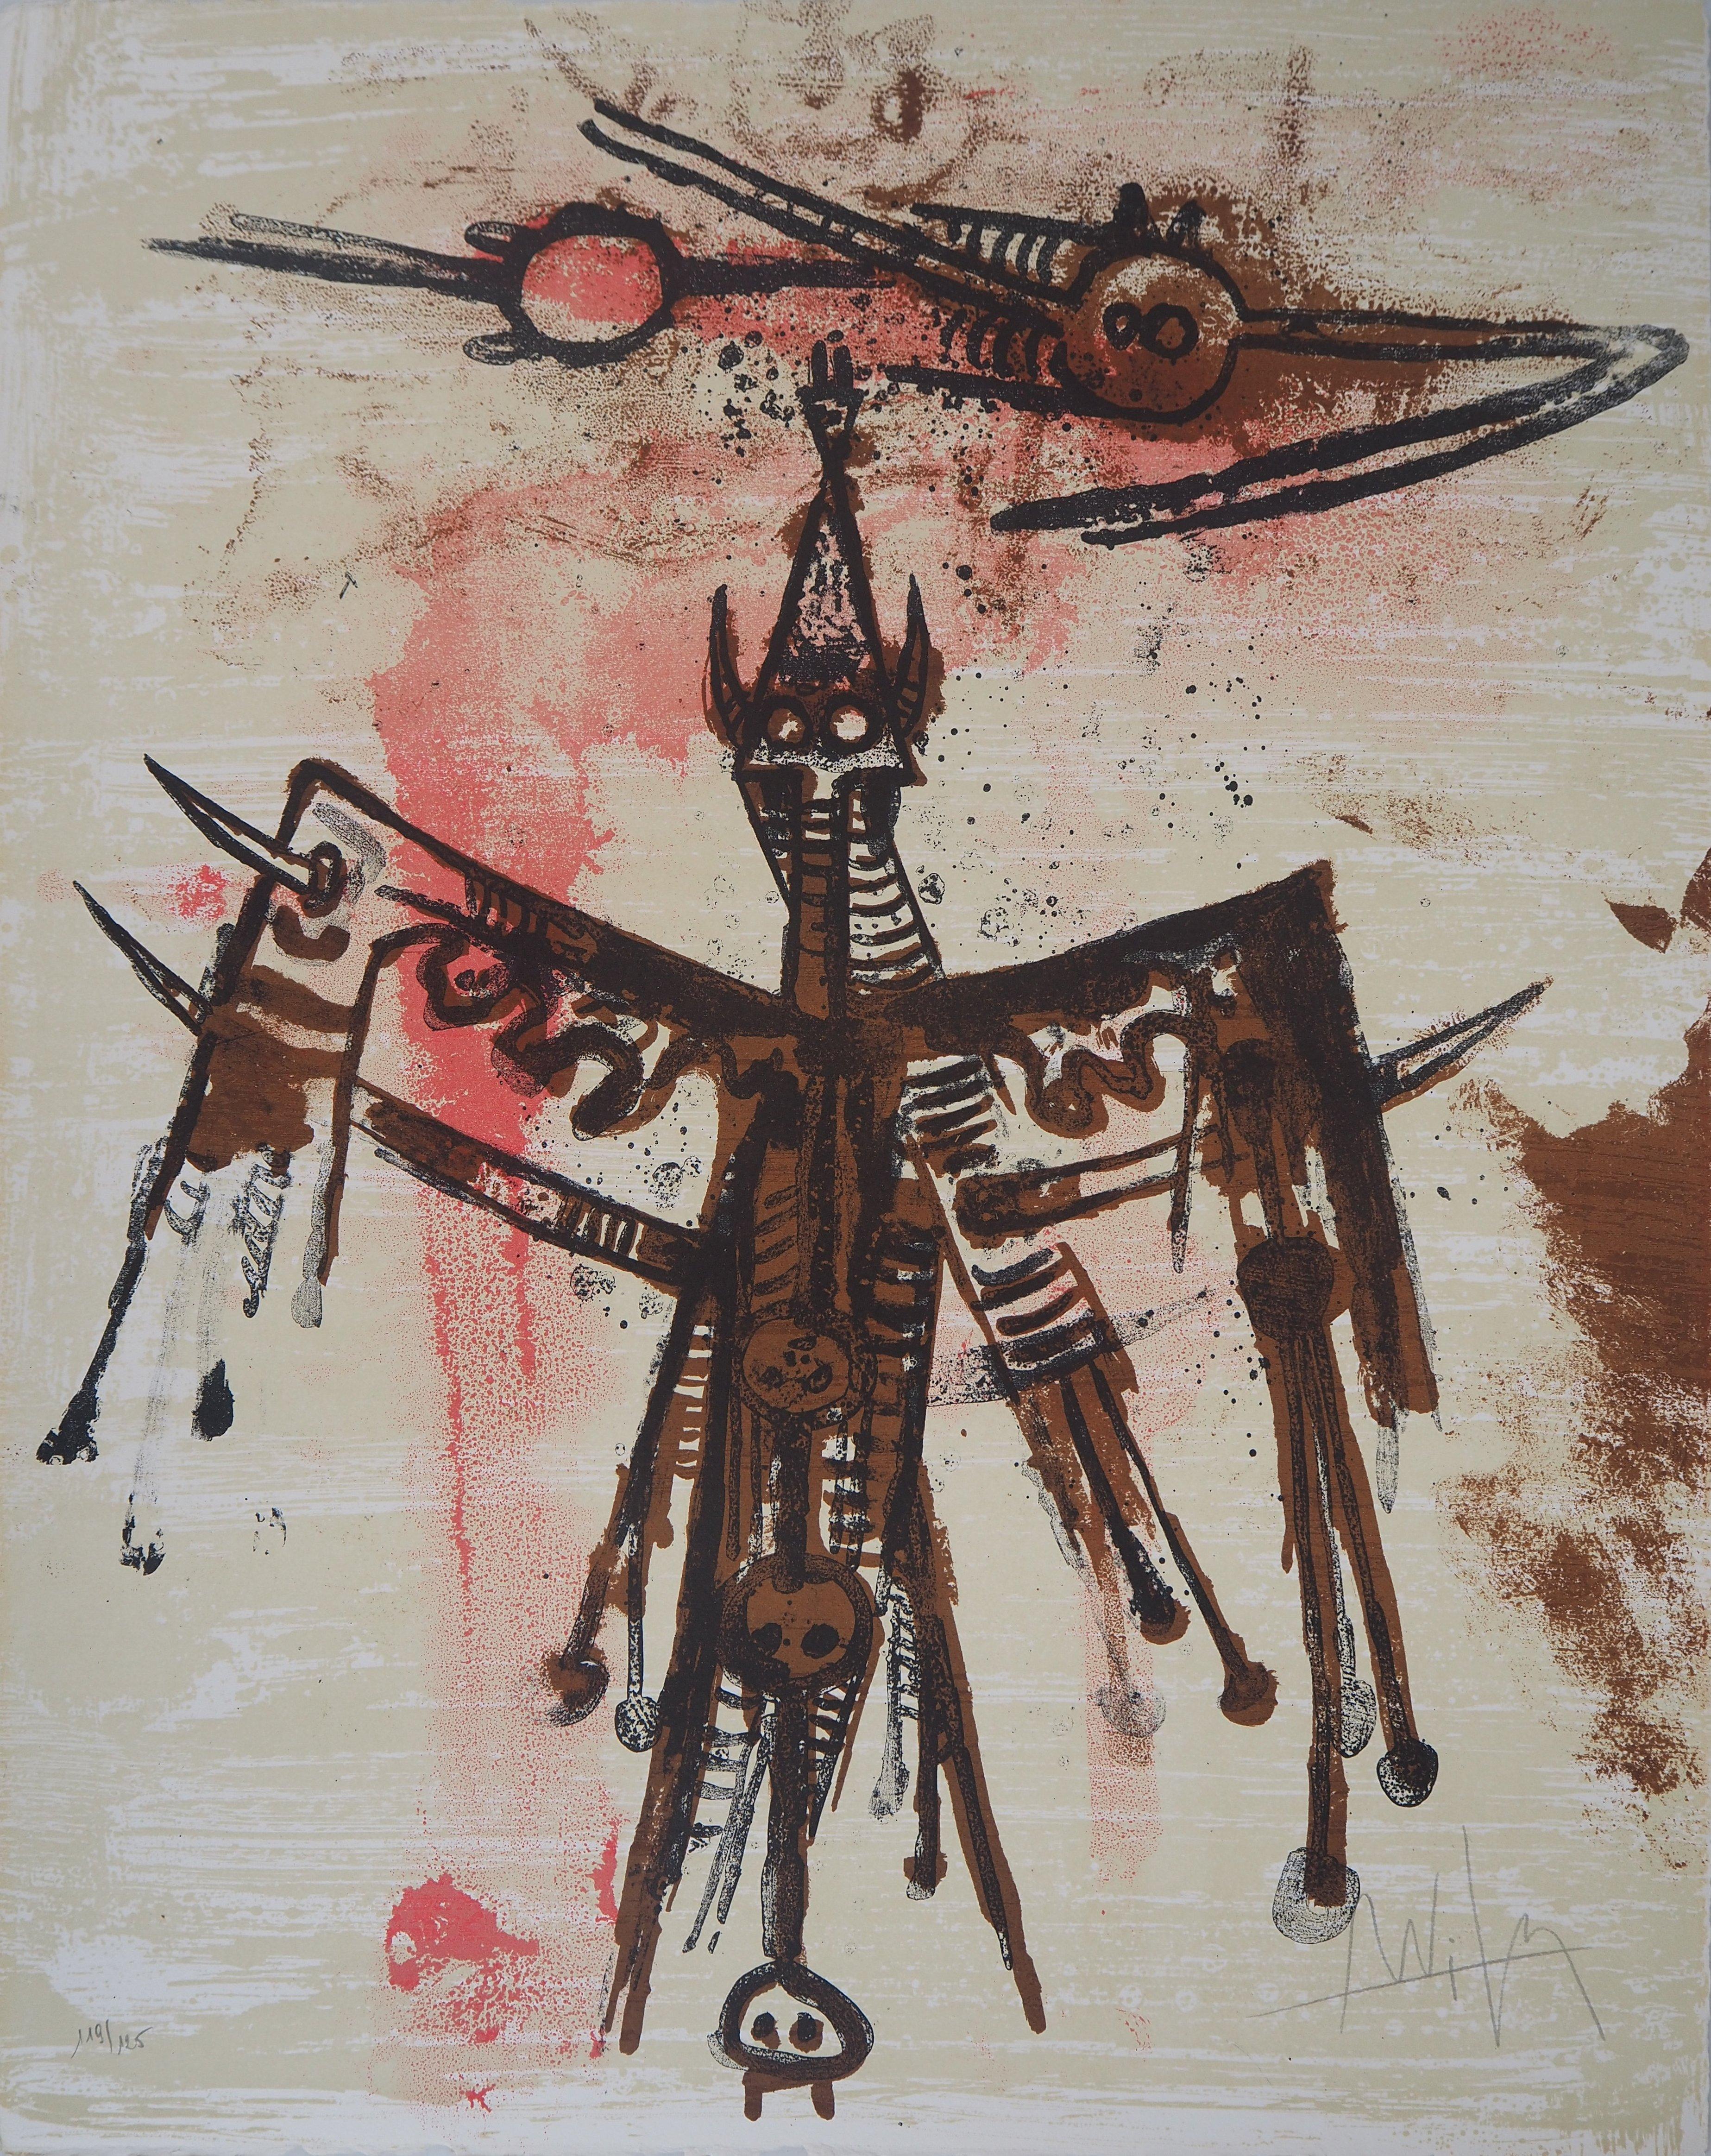 Wifredo Lam Abstract Print - Bird and Spirit Figure - Original Lithograph, Hand Signed and N° /125 